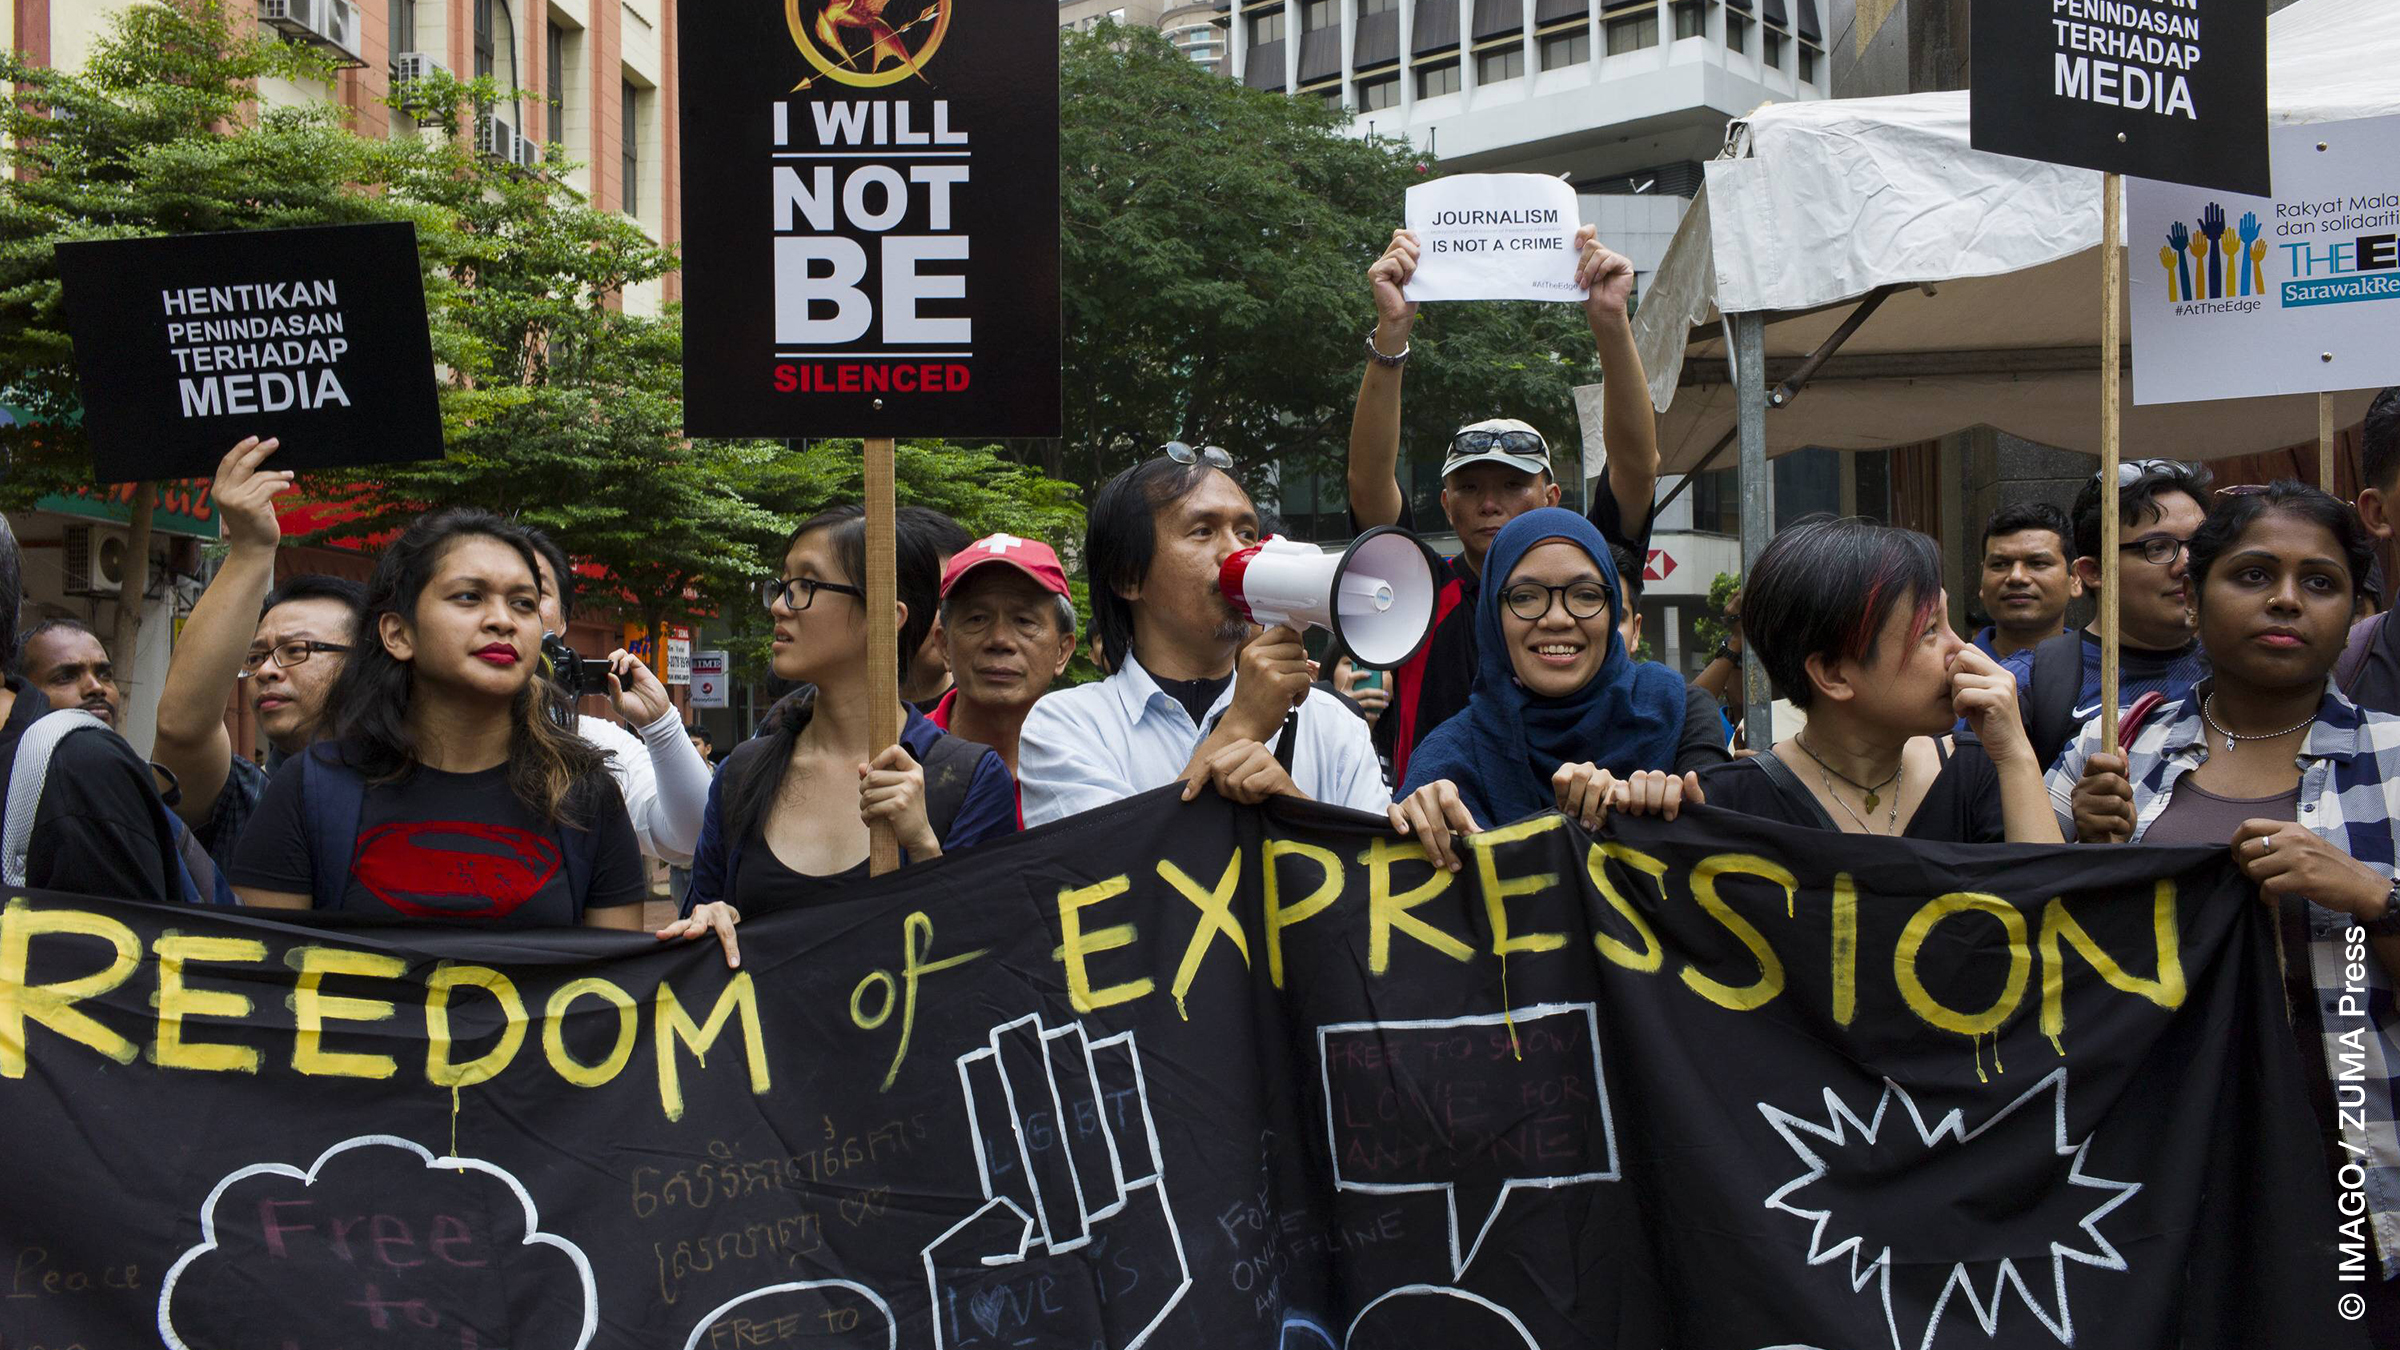 Aug. 8, 2015 - Kuala Lumpur, Malaysia - Journalists were joined by activists, lawyers, politicians and members of the public in a demonstration and rally on the streets